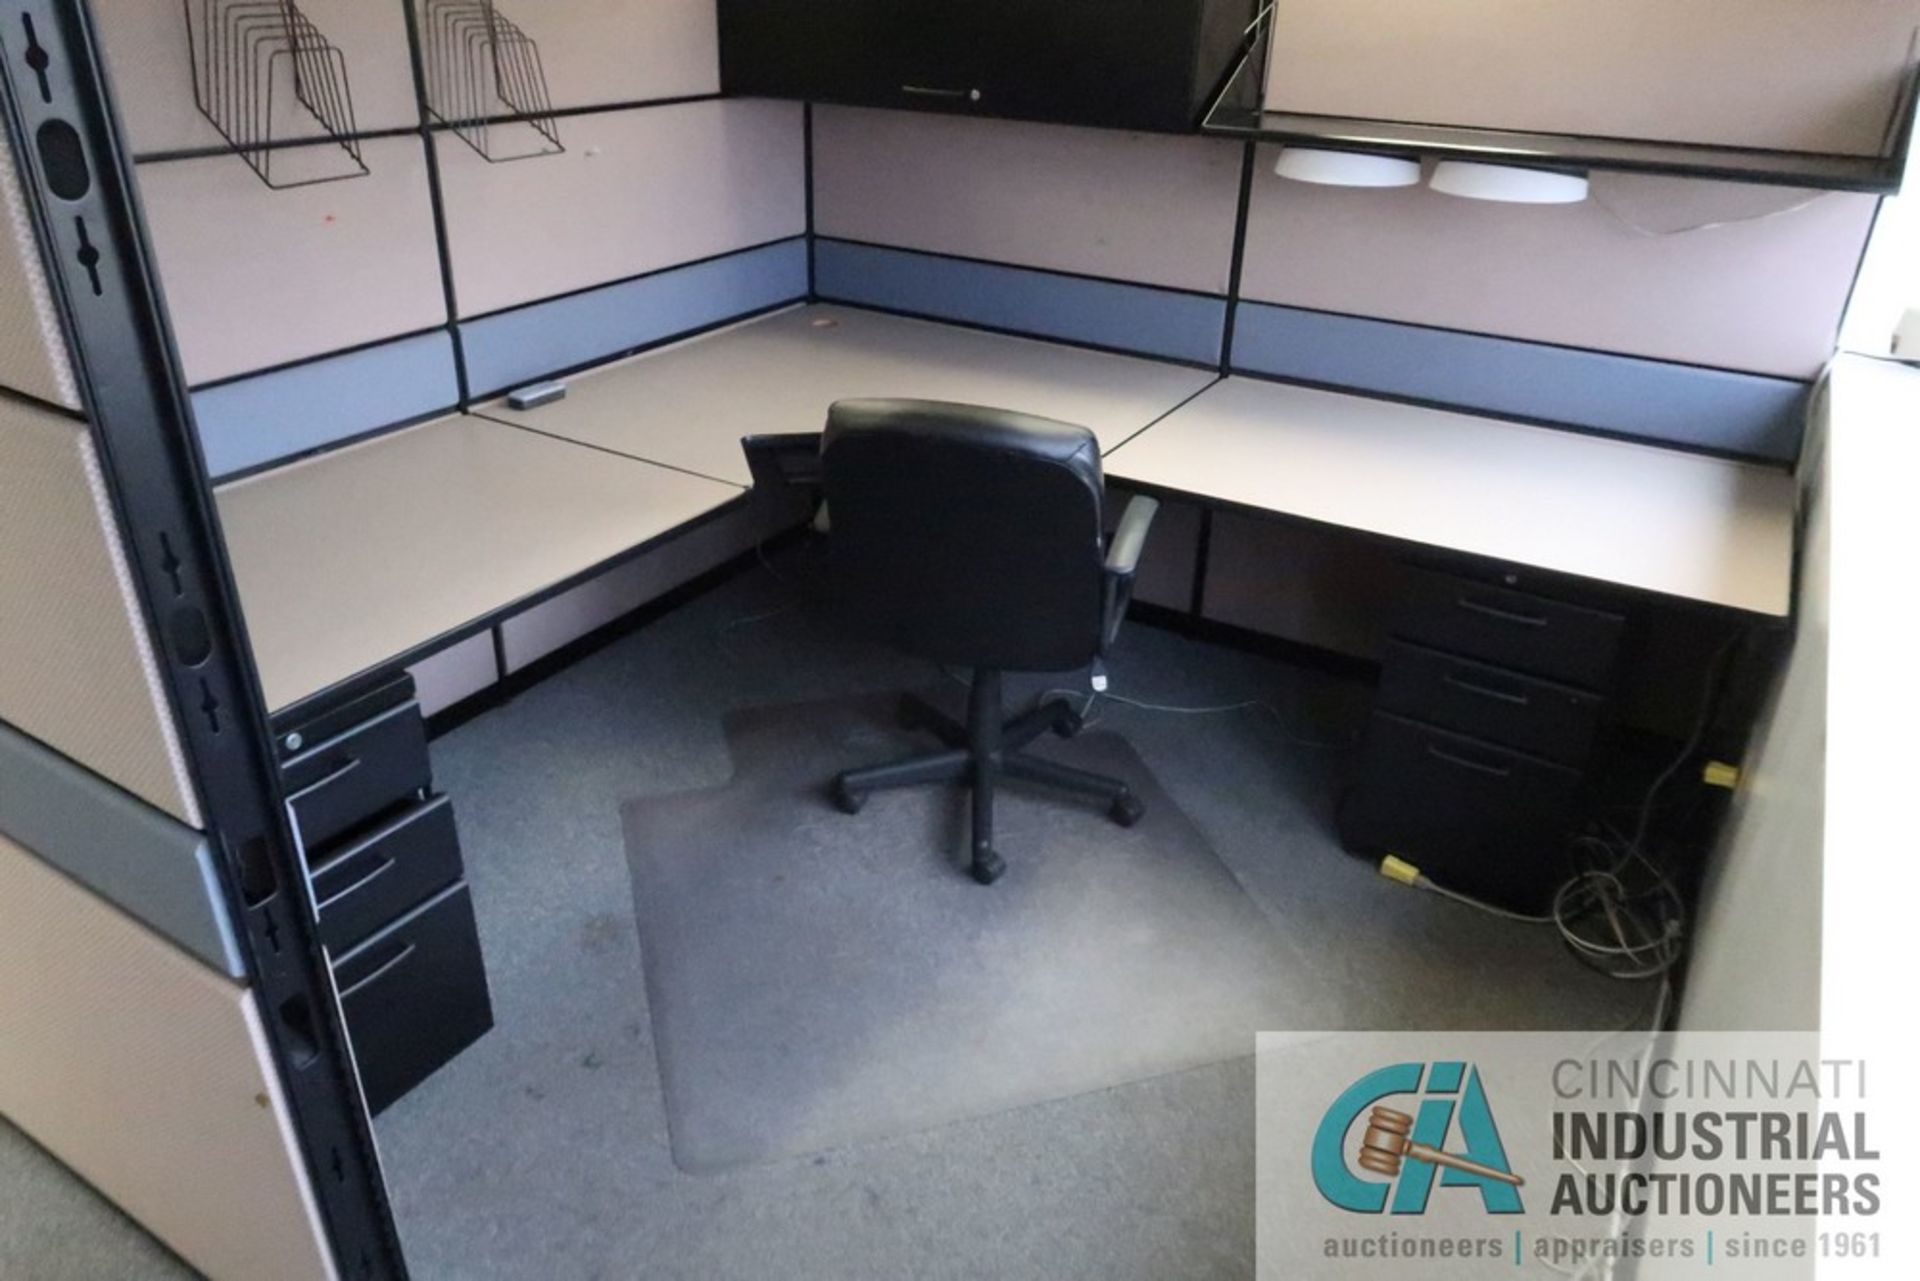 (LOT) (4) CUBICLES, 96" X 96" L-SHAPED DESKS, (4) EXECUTIVE CHAIRS, (3) SIDE CHAIRS, FILE CABINETS - Image 5 of 6